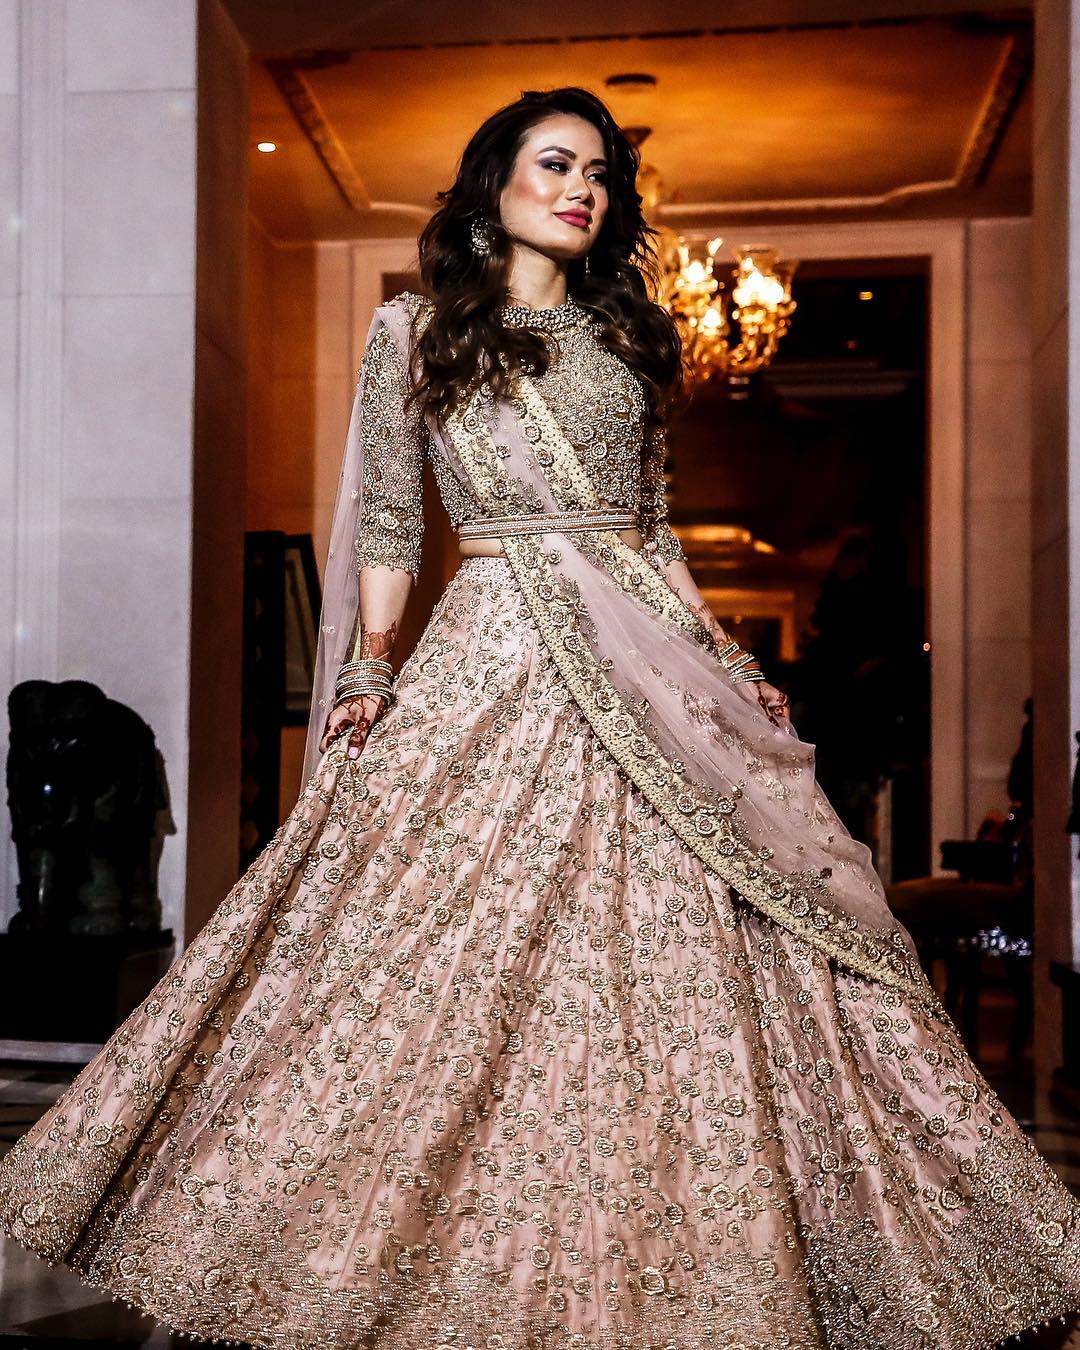 You Can Buy Your Perfect Wedding Gowns At These Chic Shops In Delhi |  WhatsHot Delhi Ncr